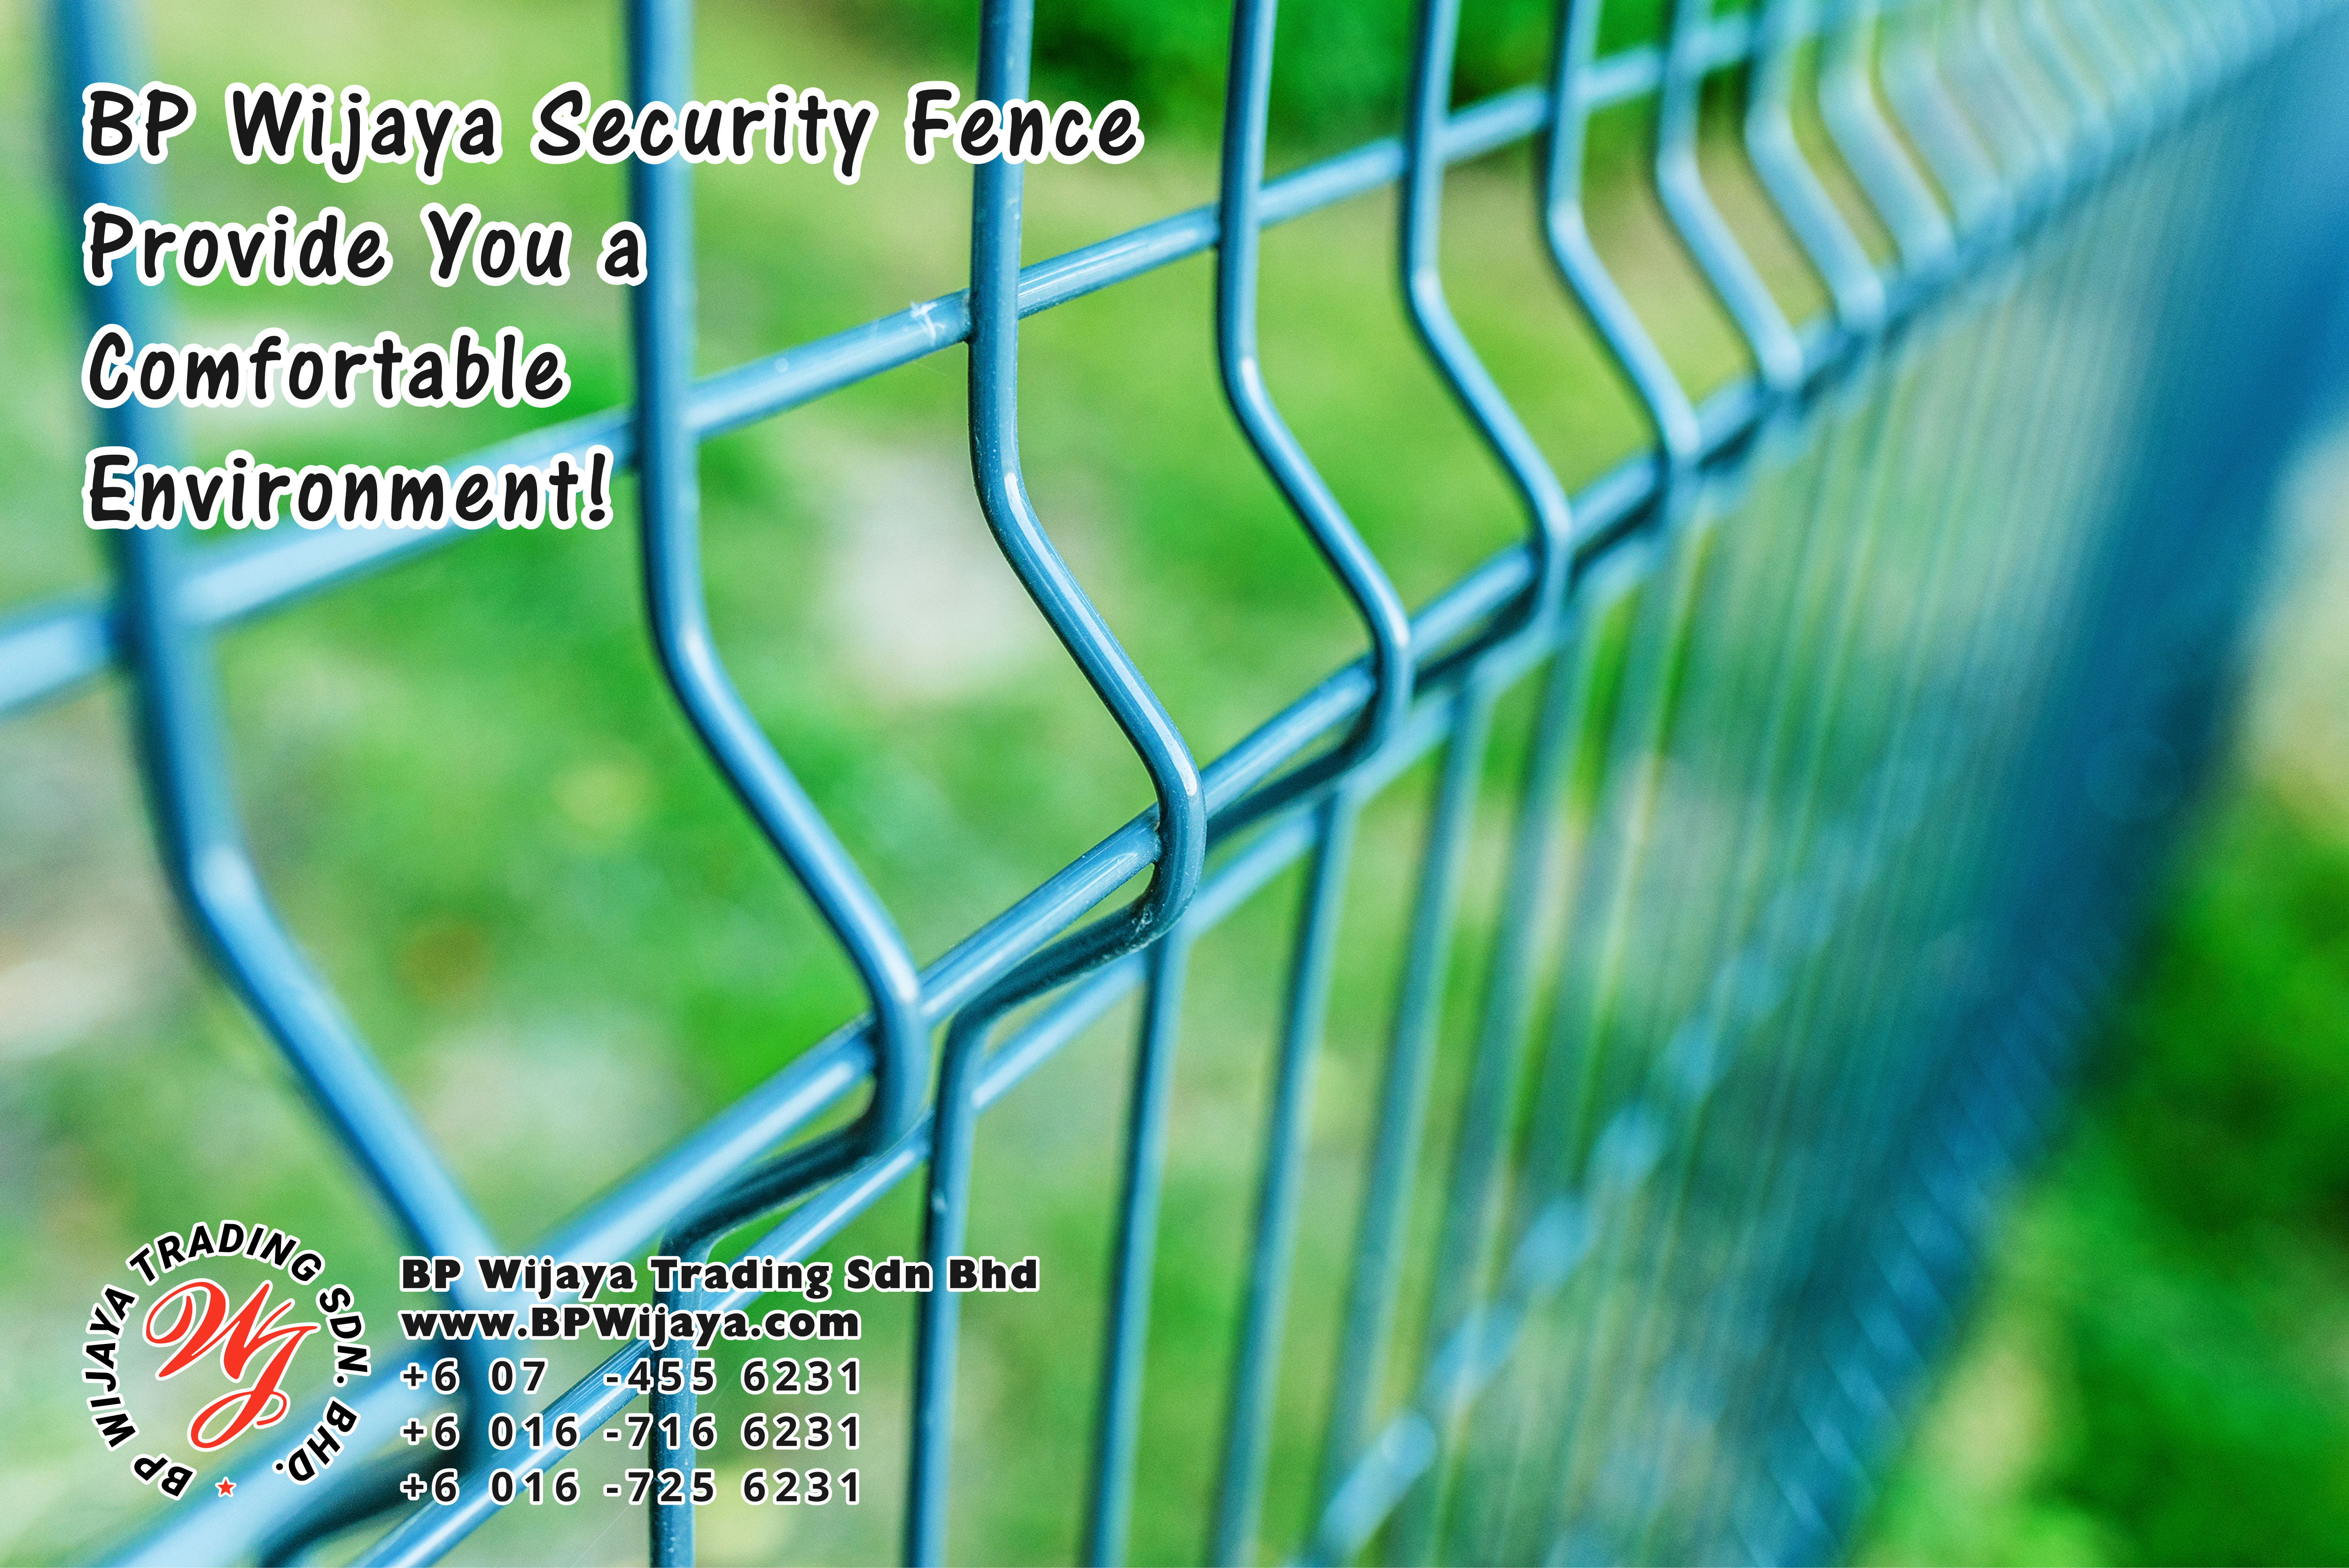 BP Wijaya Trading Sdn Bhd Malaysia Selangor Kuala Lumpur Manufacturer of Safety Fences Building Materials for Housing Construction Site Security Fencing Factory Security Home Security C01-28